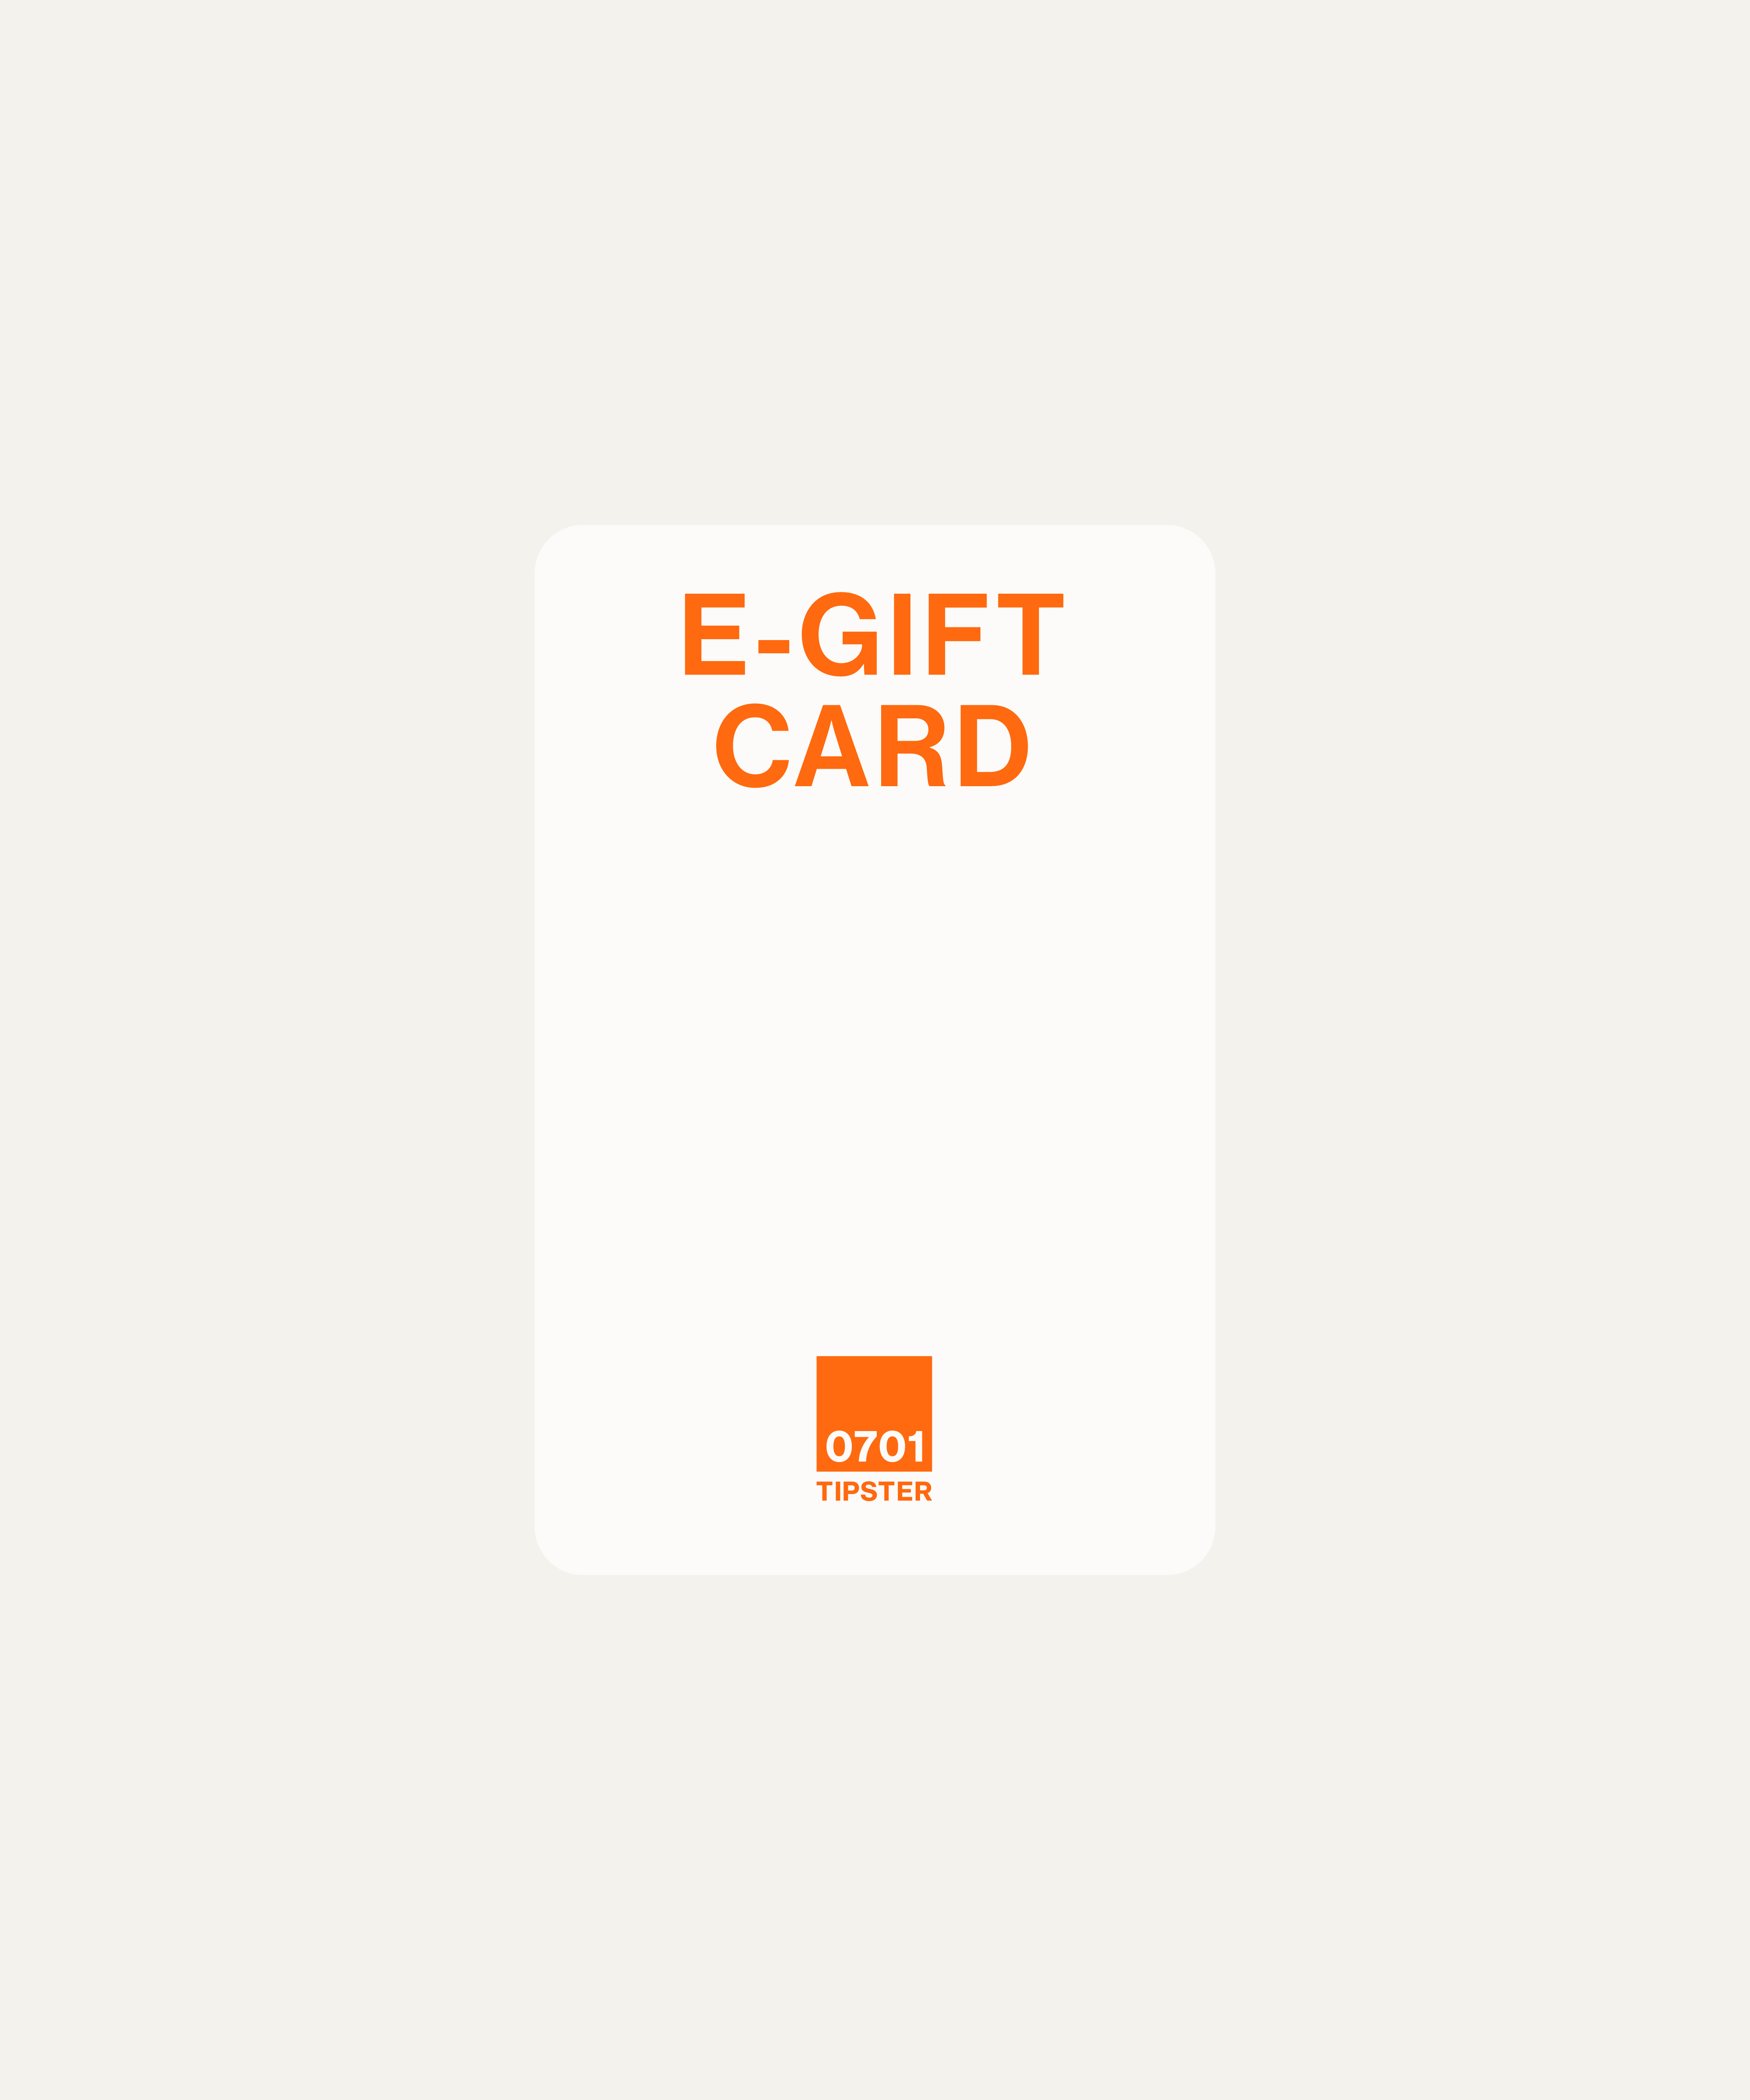 E-gift card for upcoming Tipster campaigns – Give your friends + family the gift of Tipster